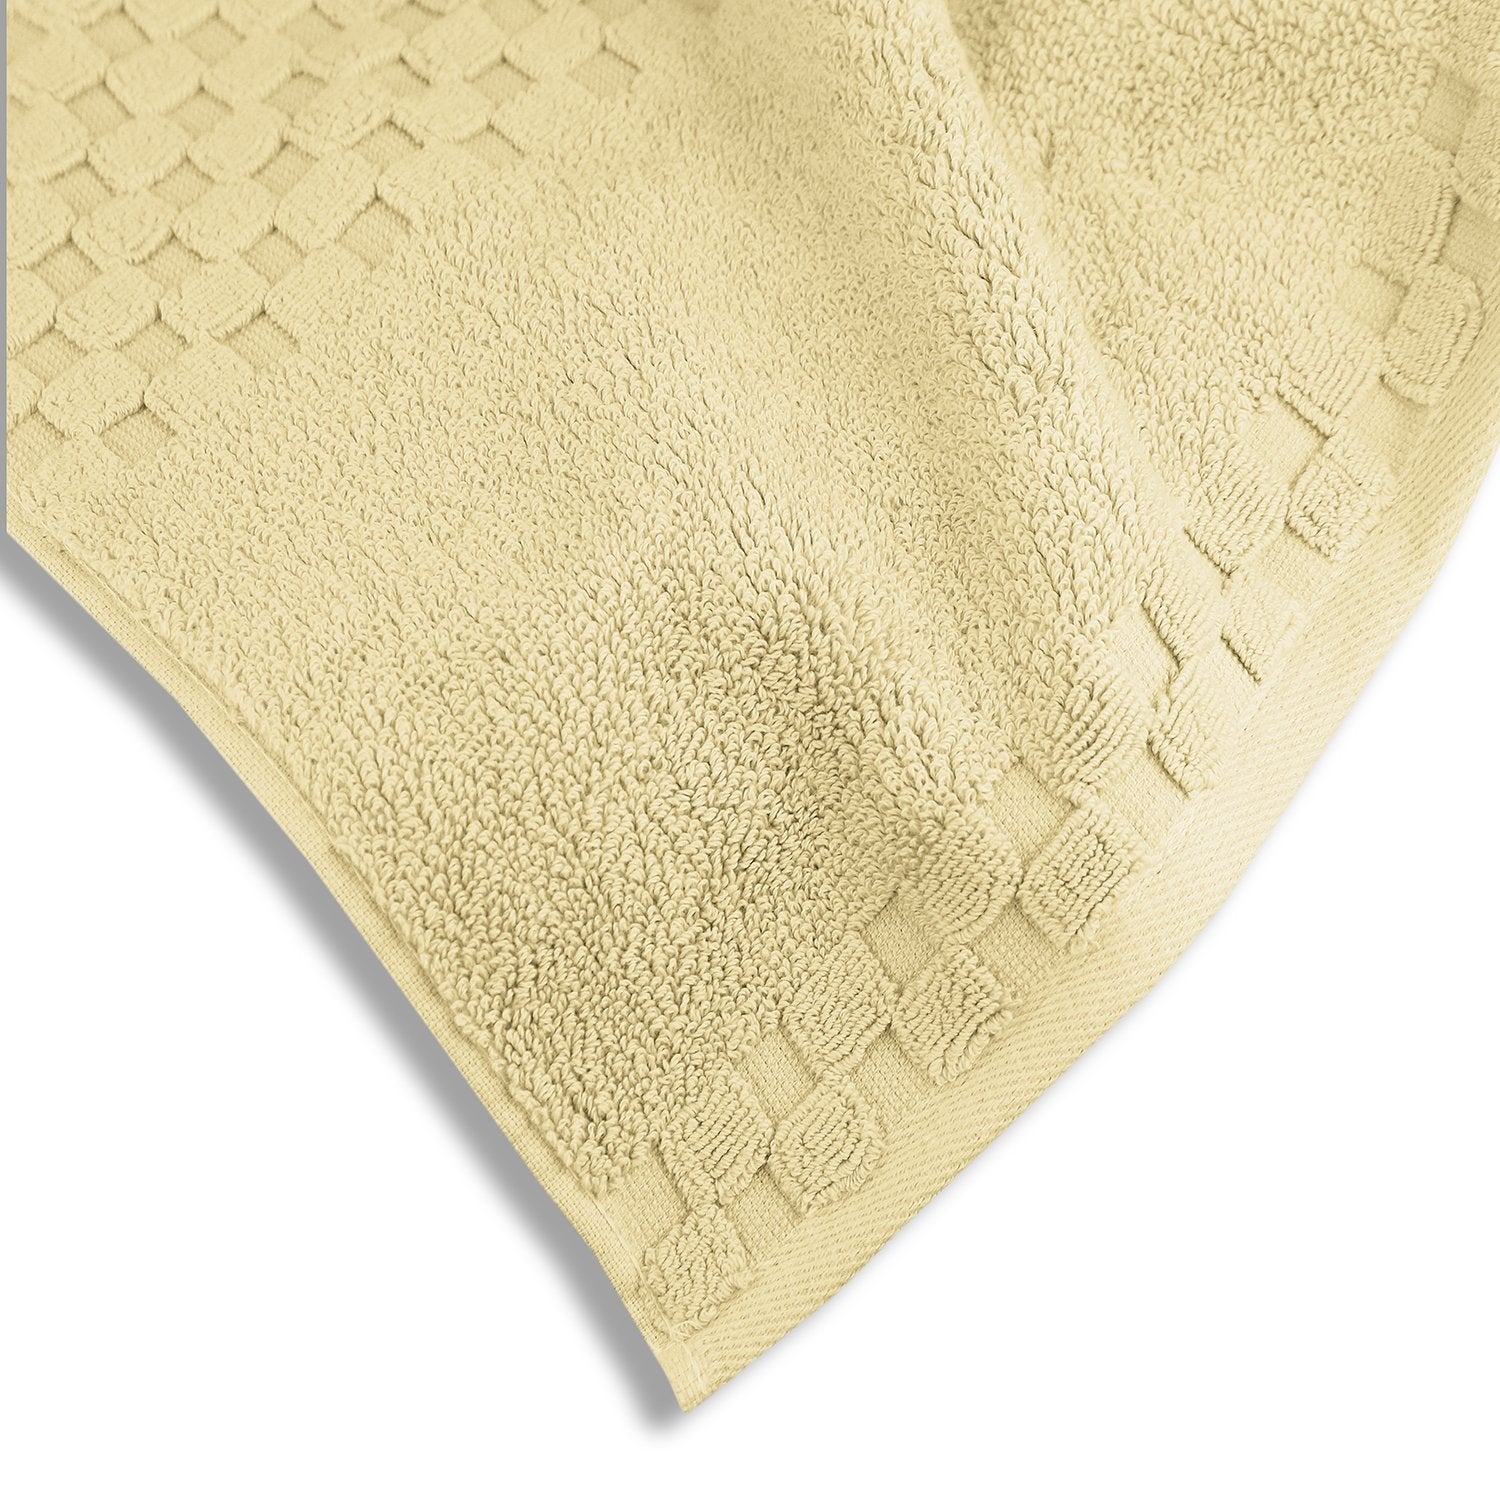 Hotel Collection Bath Towels